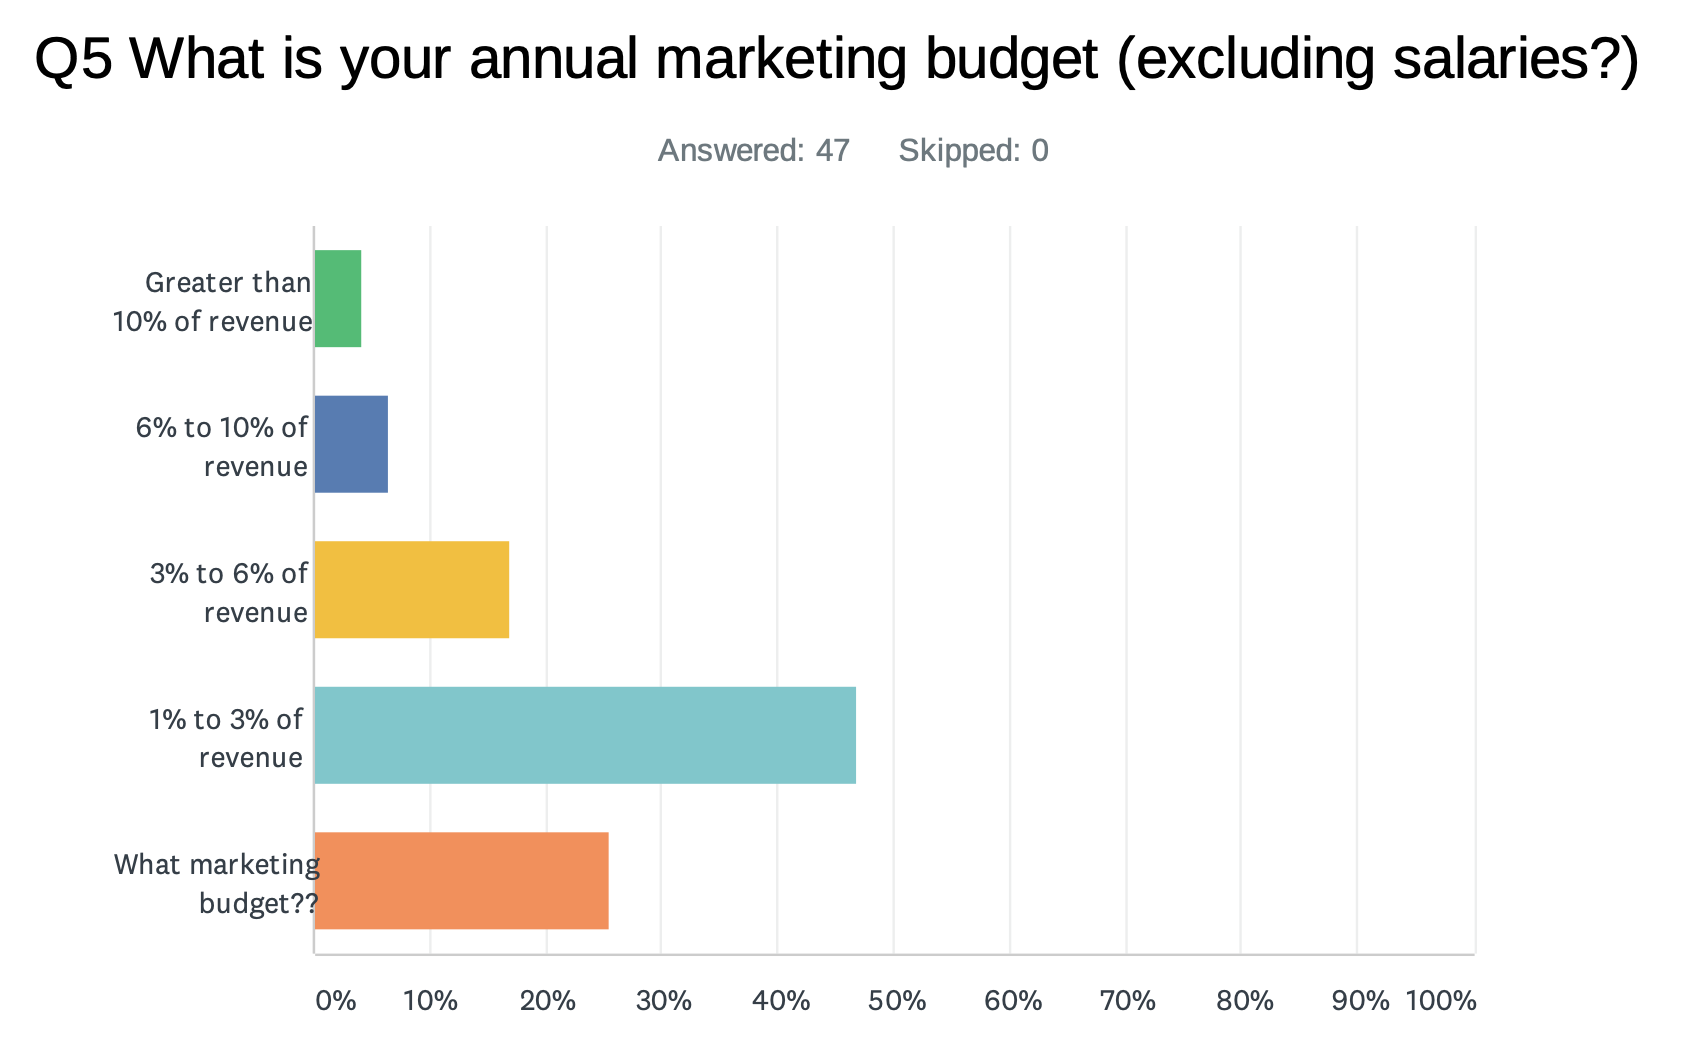 lack of marketing budget is a big challenge for in-house marketers